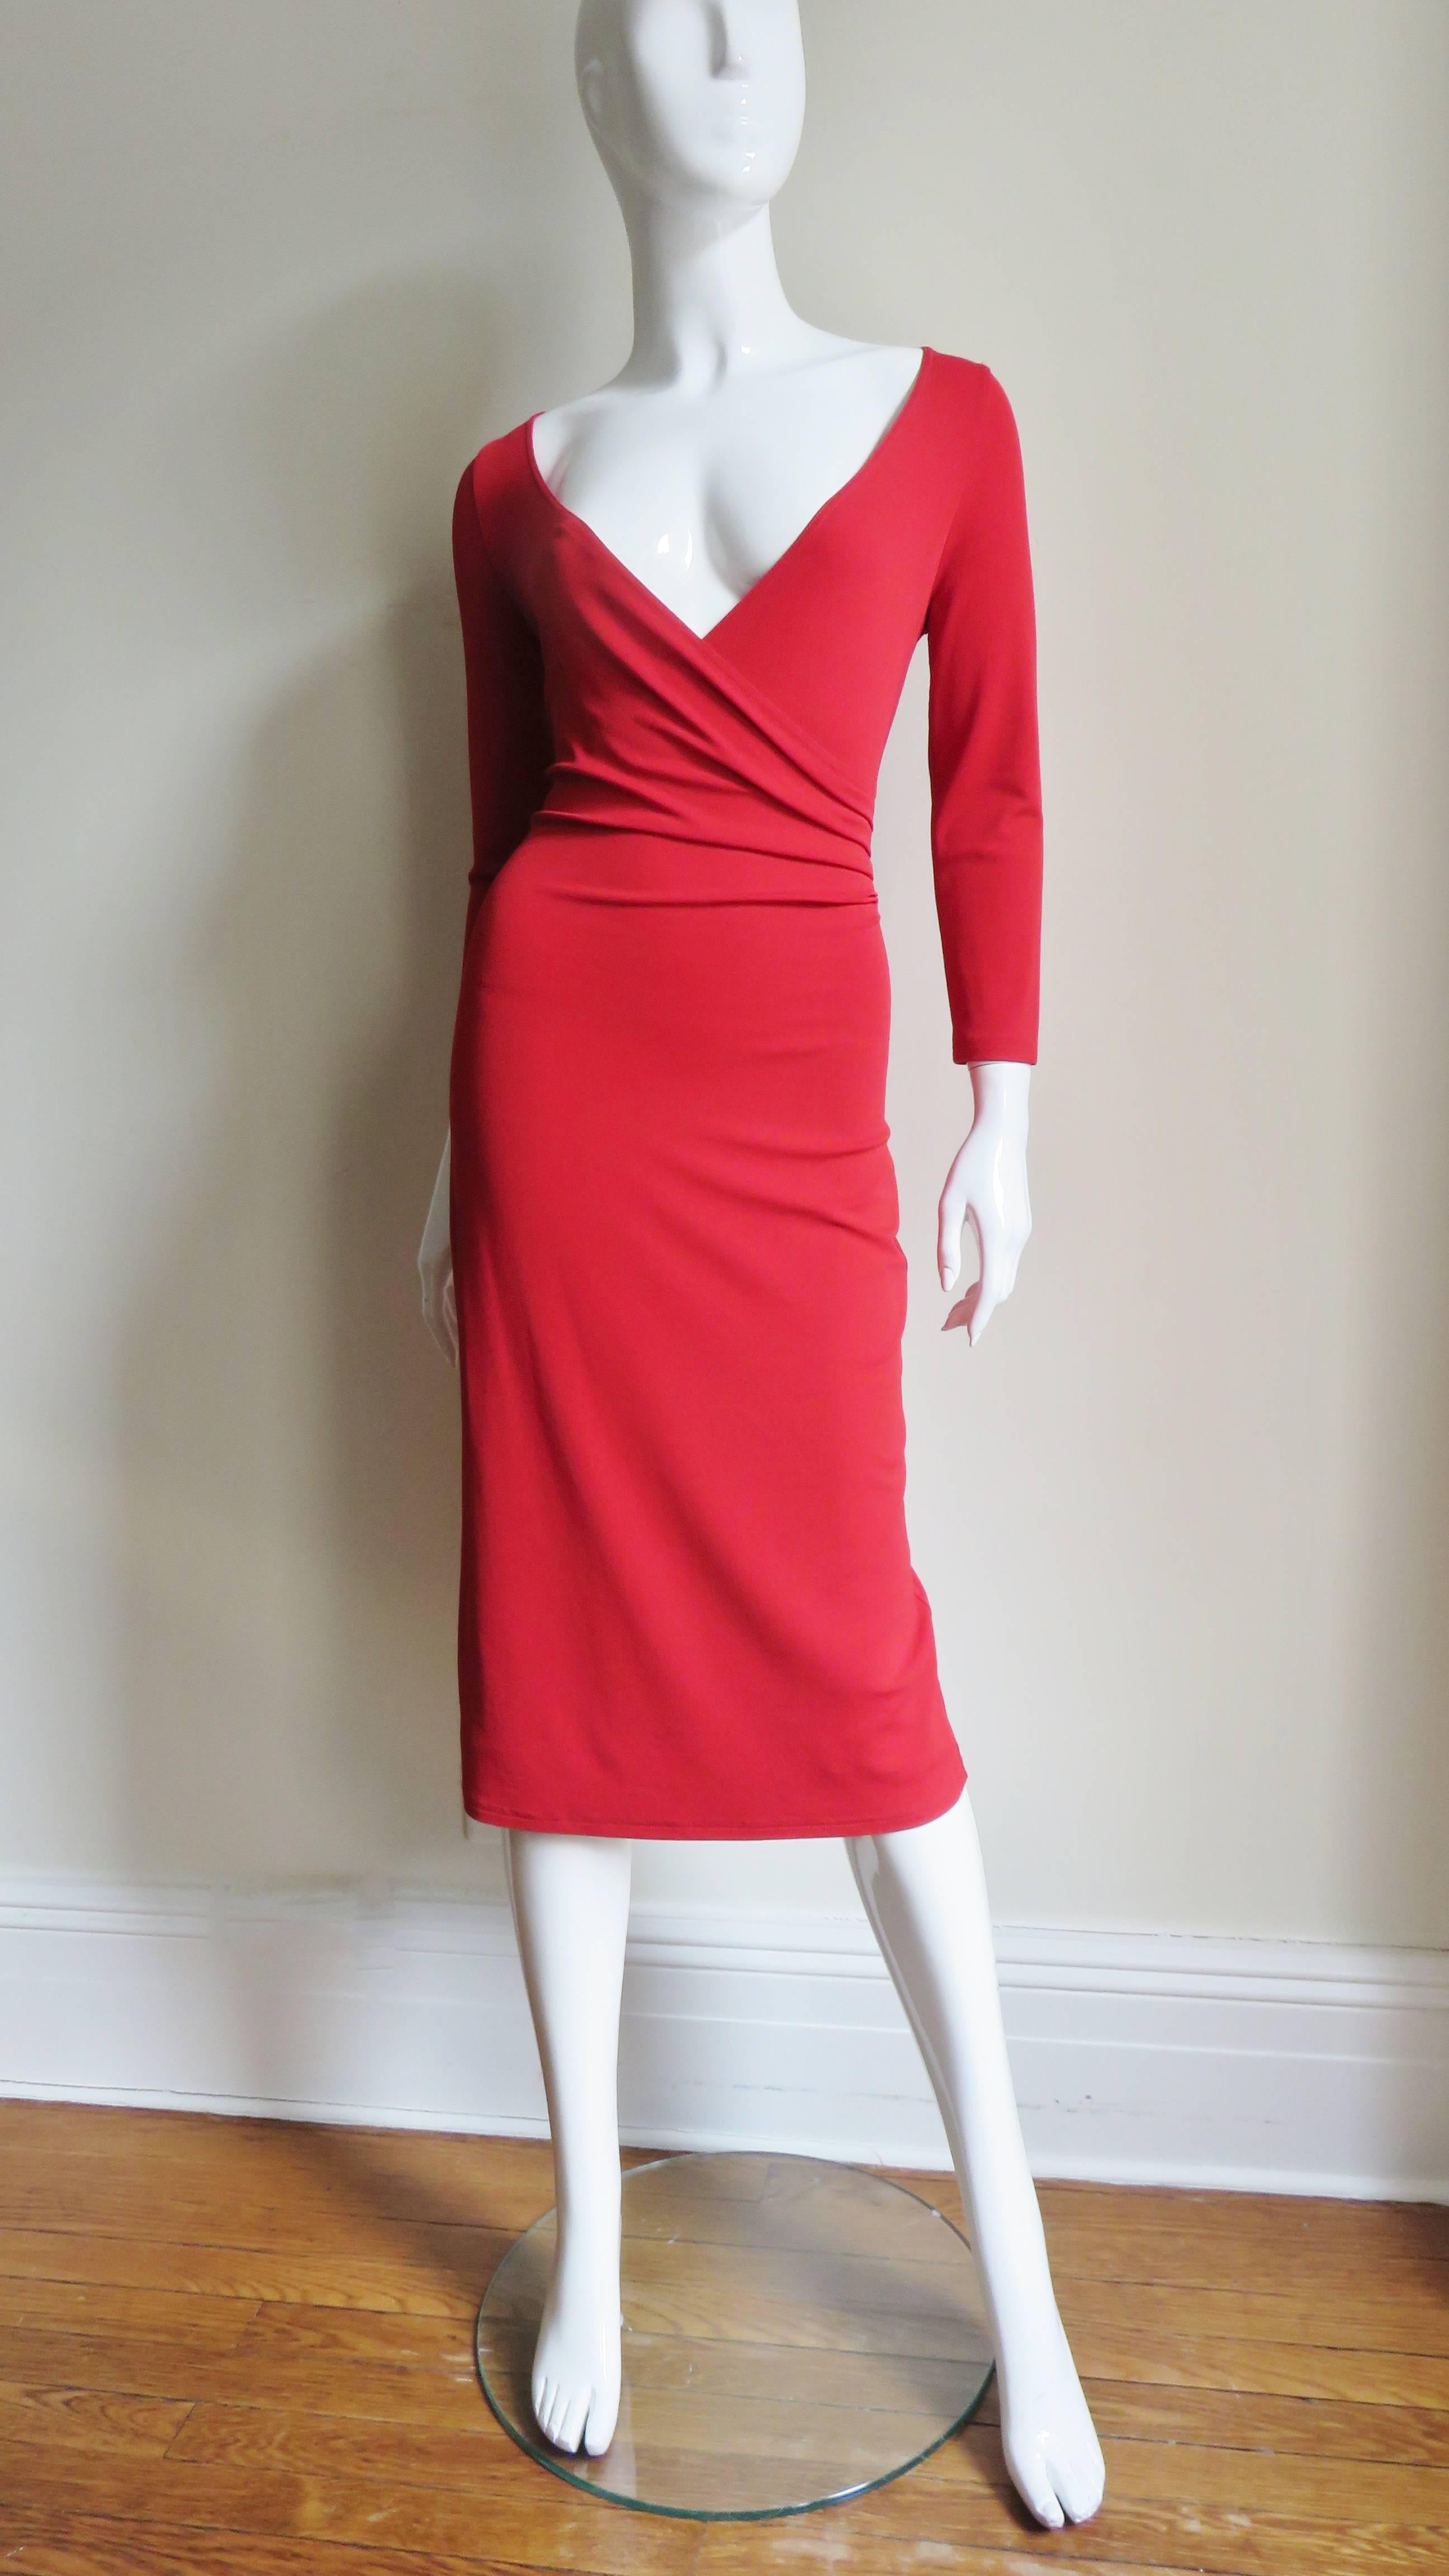 Celine Wrap Bodycon Dress In Good Condition For Sale In Water Mill, NY